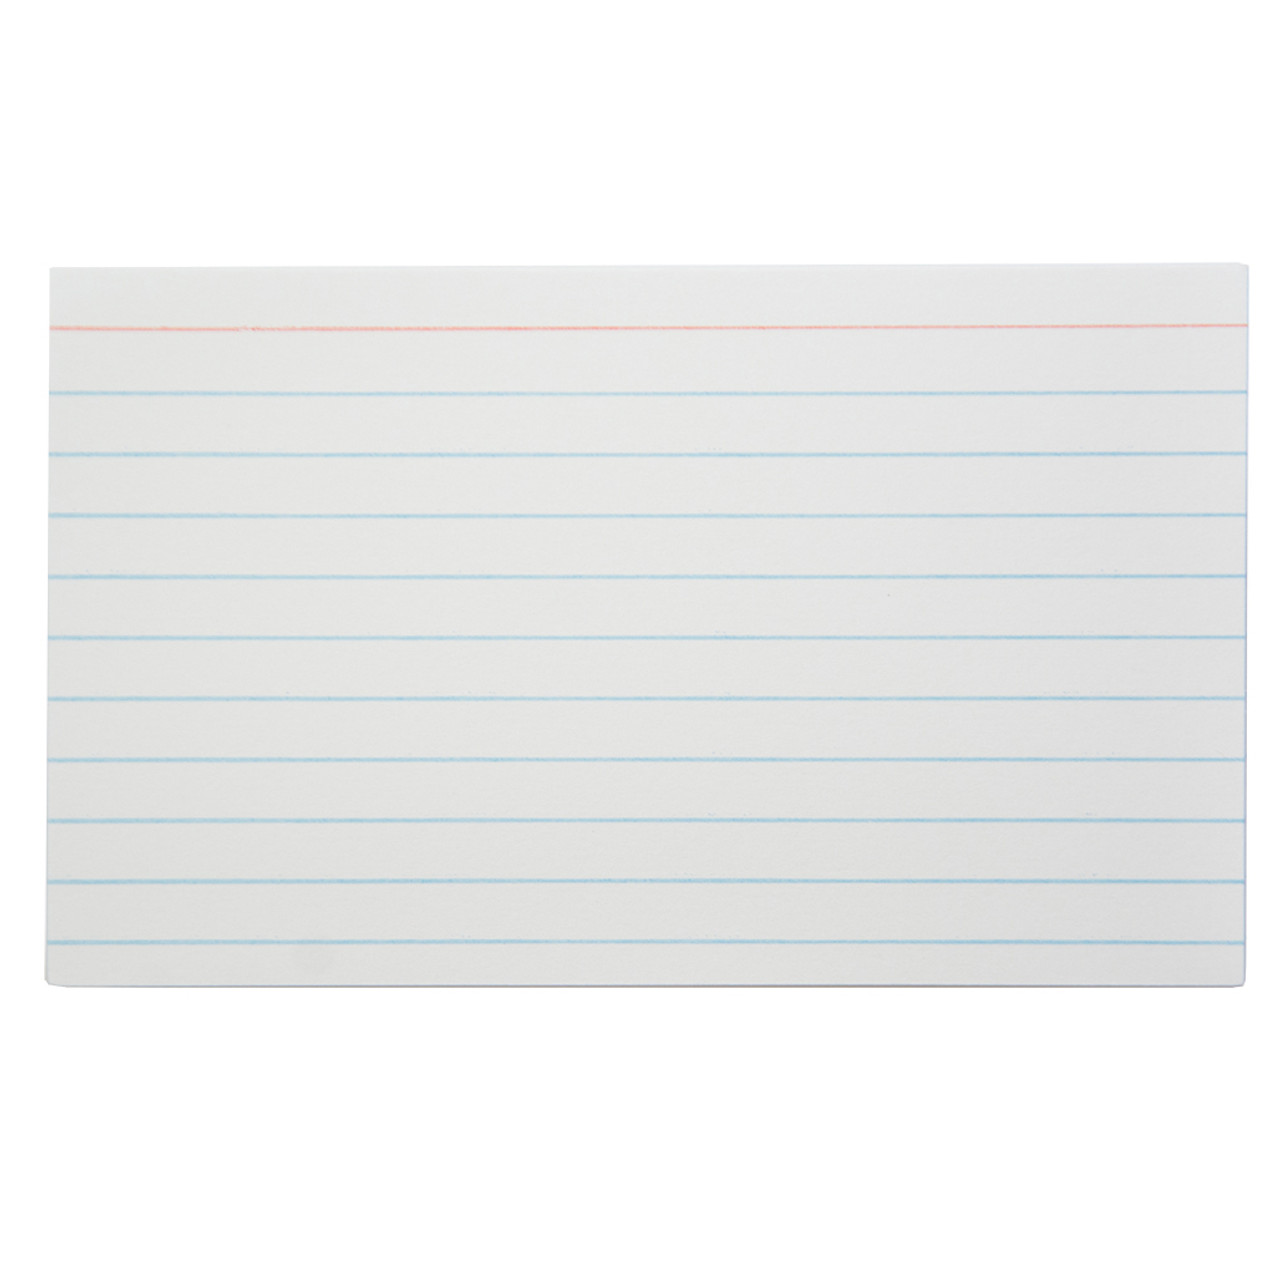  1InTheOffice Index Cards 4x6 Graph Ruled White, Quad